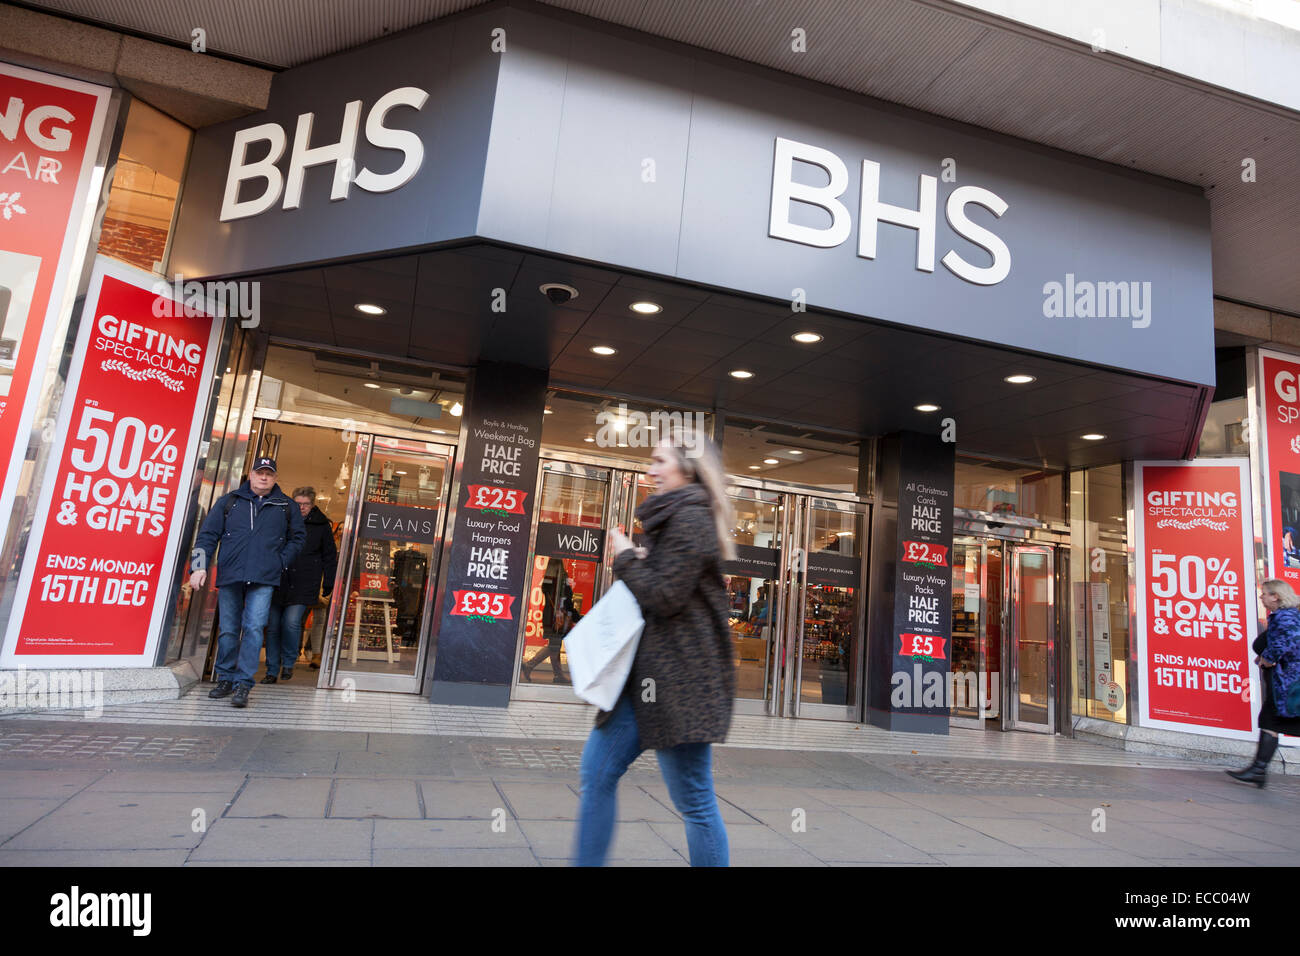 BHS clothes store on Oxford Street Stock Photo